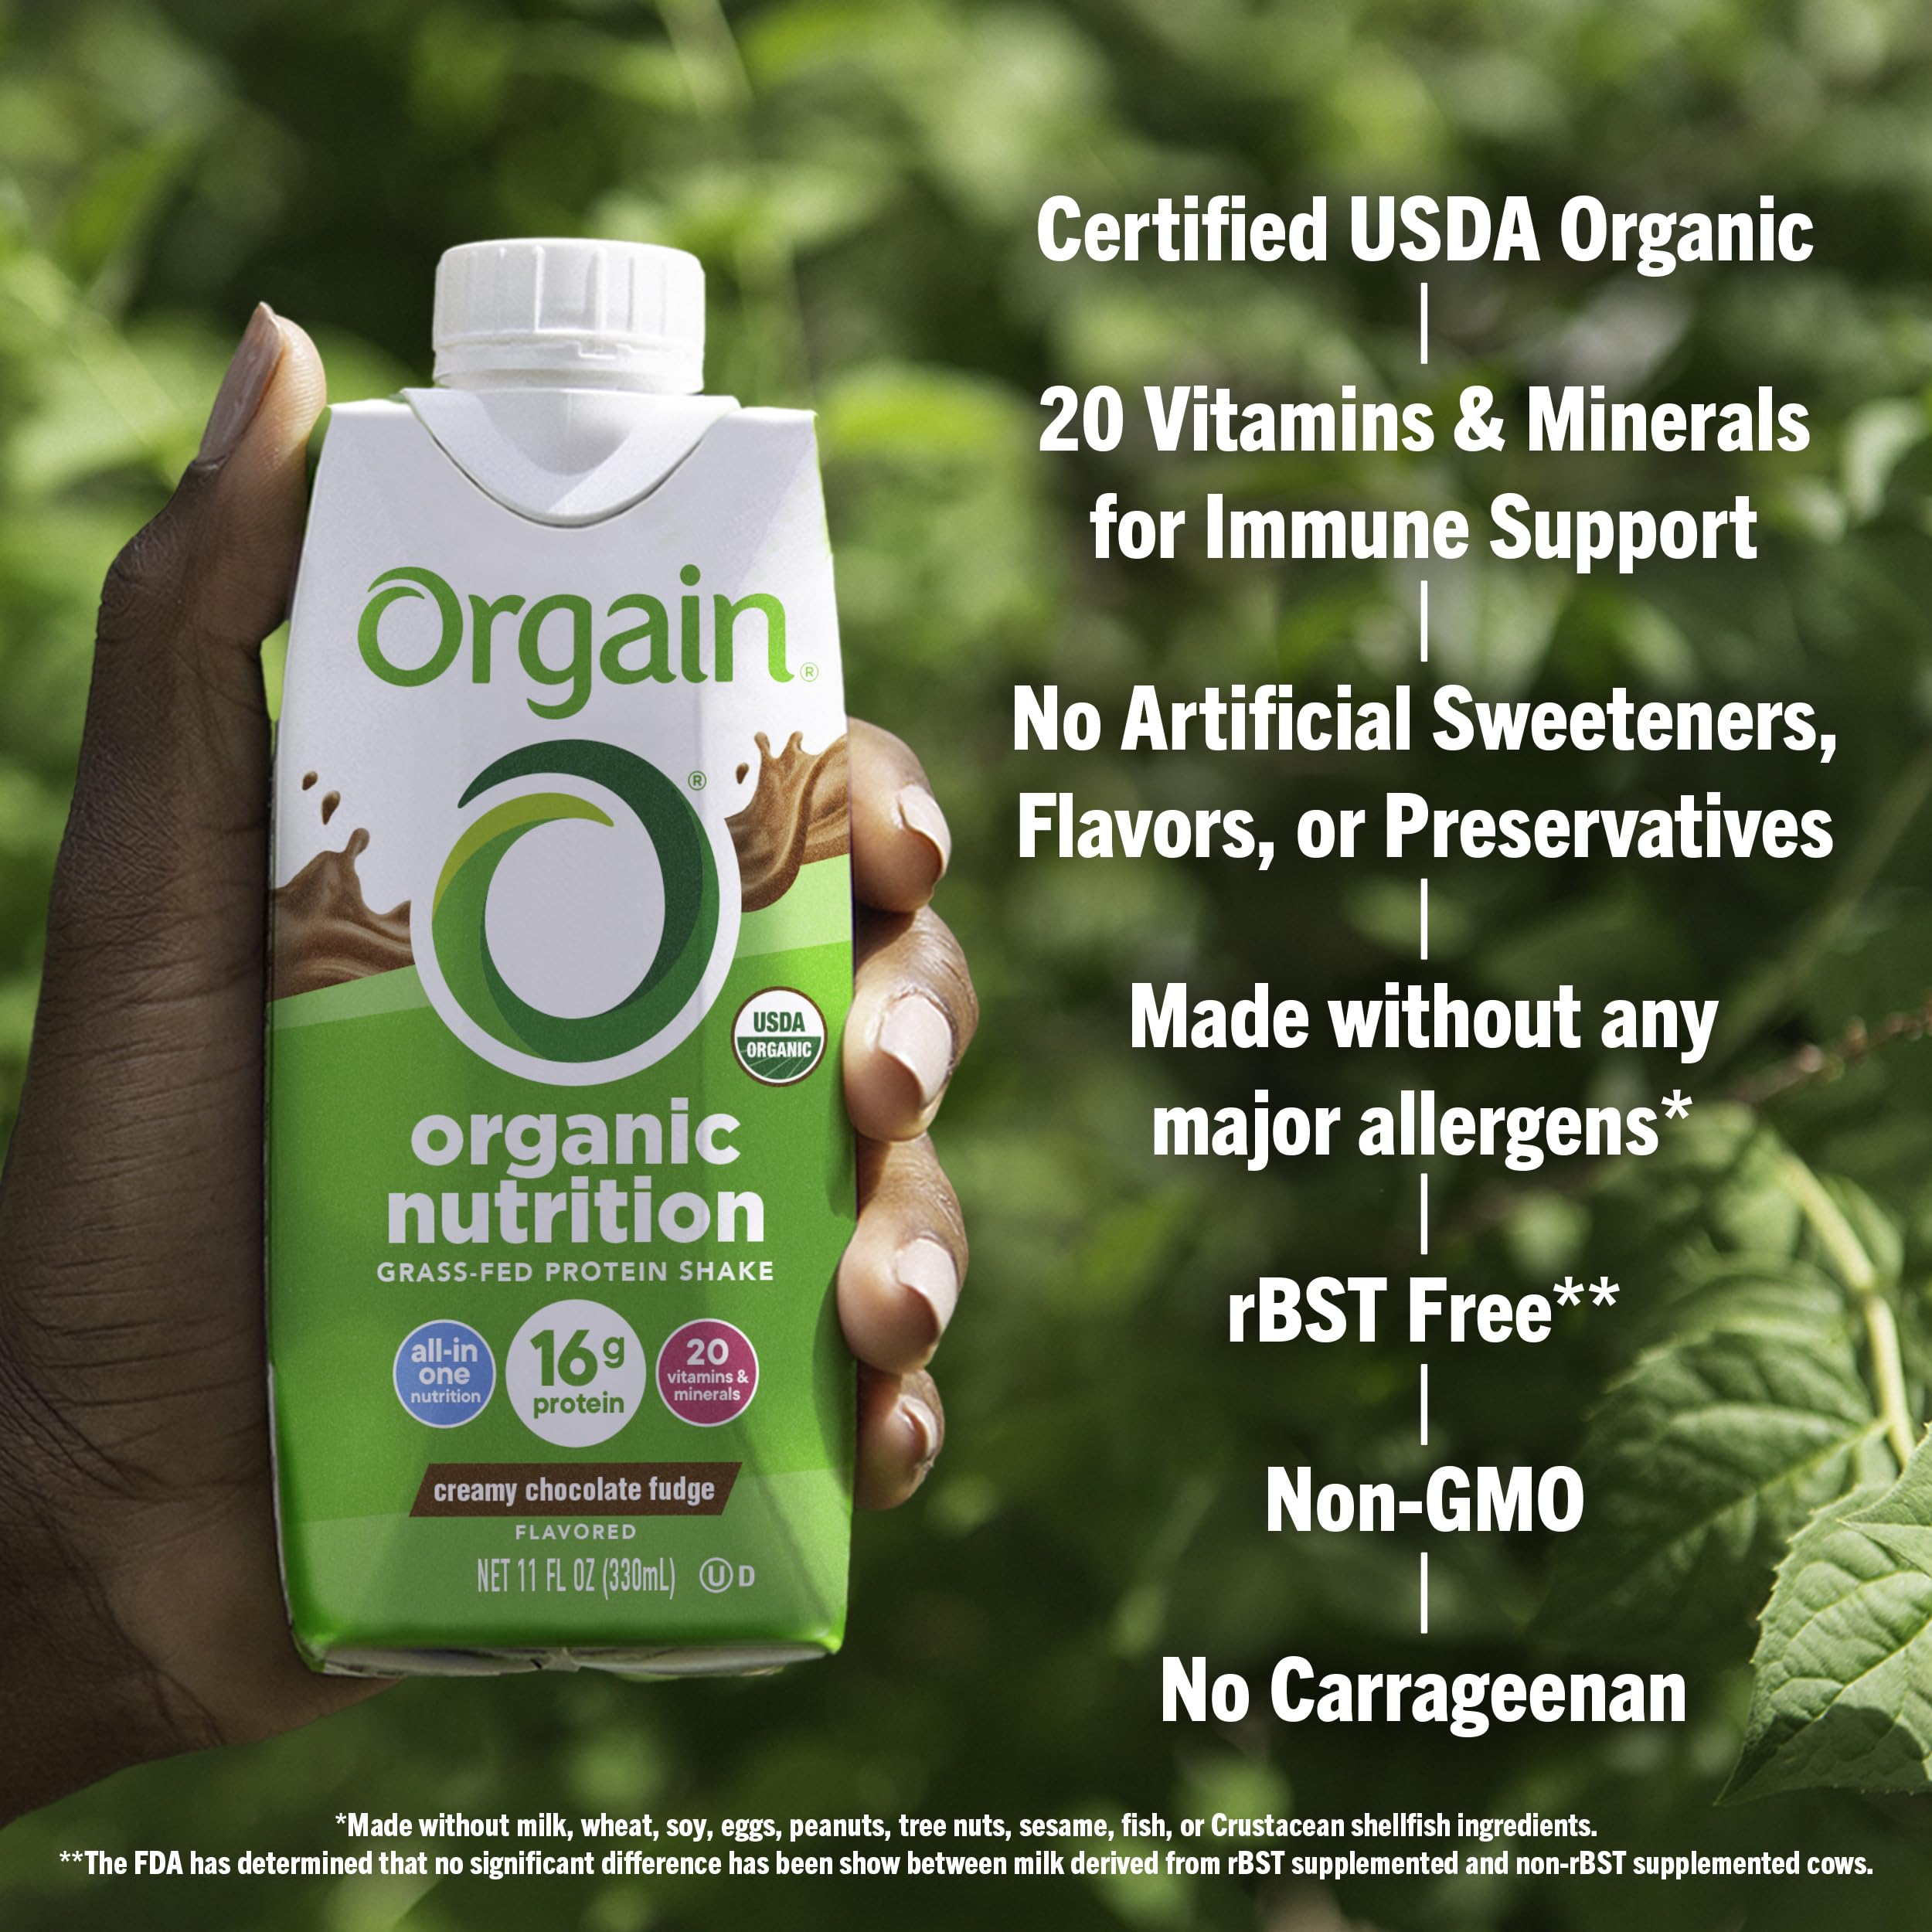 Orgain Organic Nutritional Protein Shake, Creamy Chocolate Fudge - 16g Grass Fed Whey Protein, Meal Replacement, 20 Vitamins & Minerals, Gluten & Soy Free, 11 Fl Oz (Pack of 12) (Packaging May Vary)